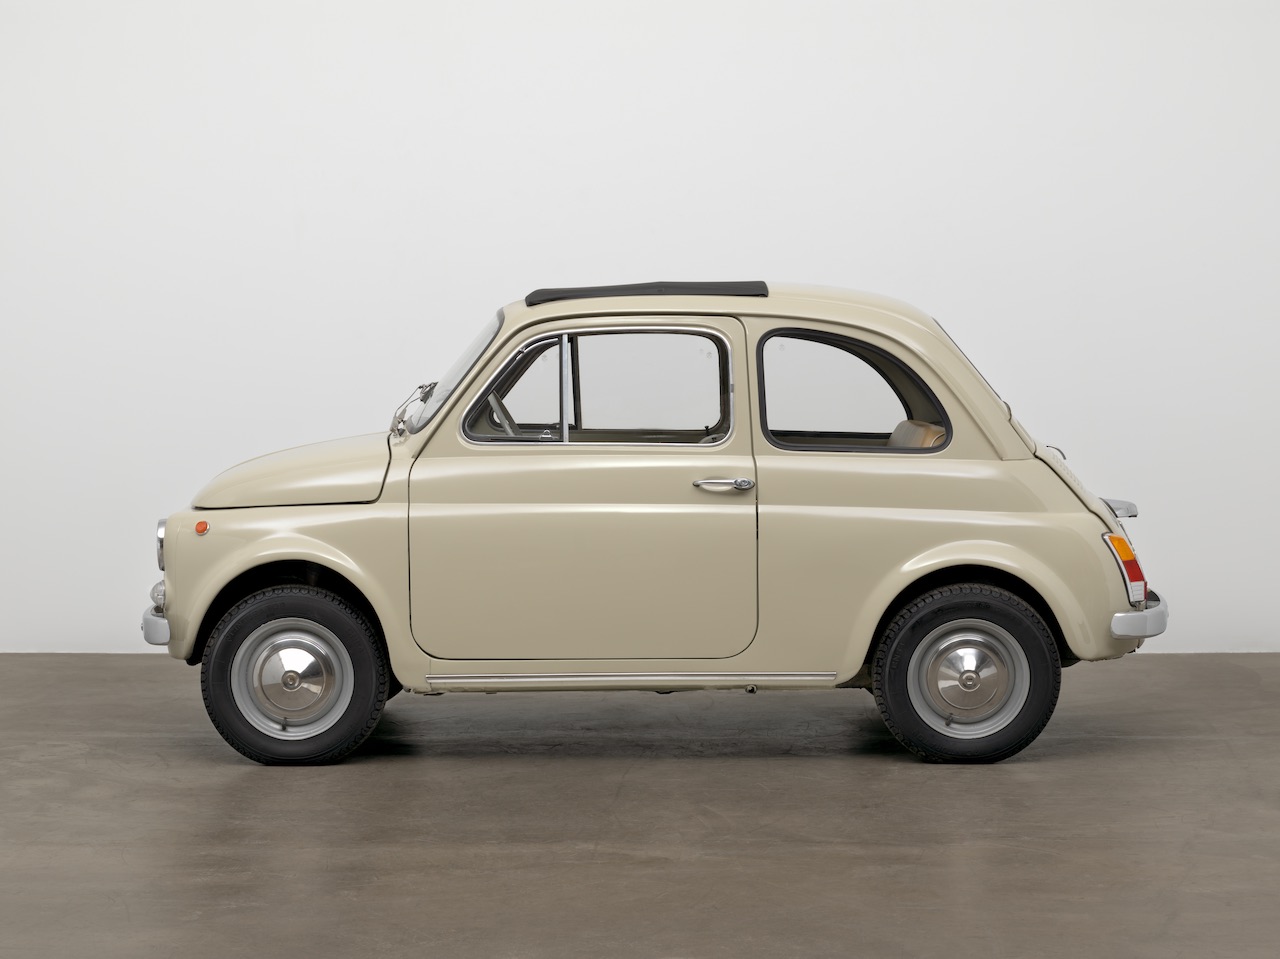 Fiat 500 goes on display at the New York Museum of Modern Art